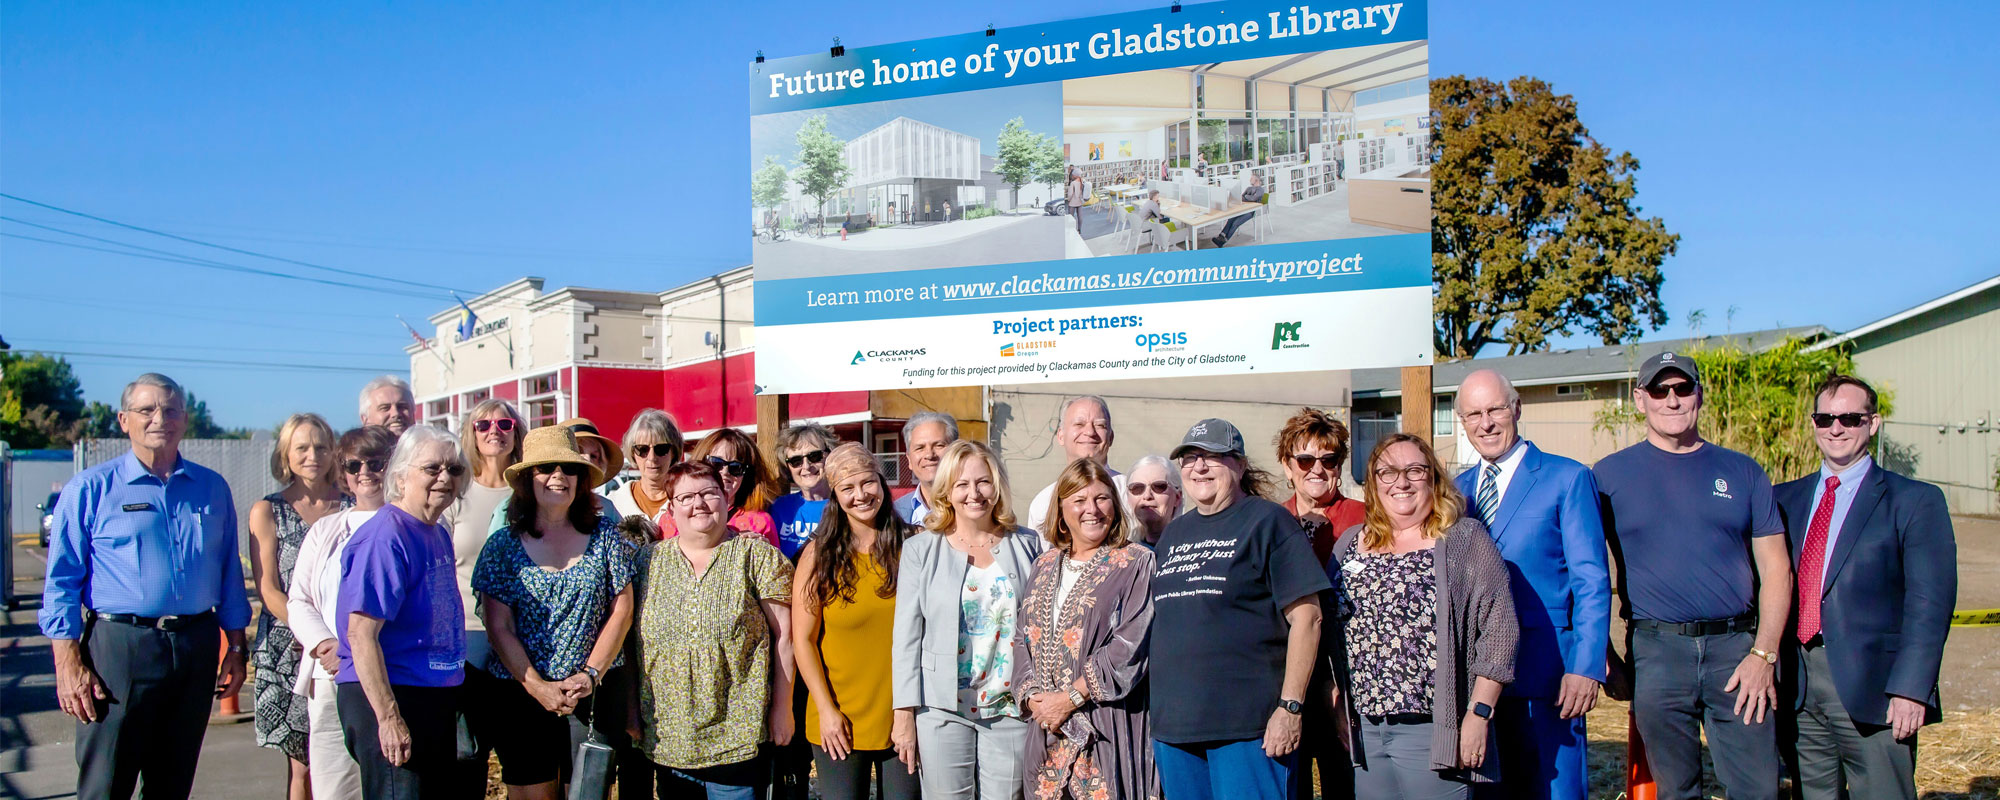 Elected officials and community members standing in front of the new sign in front of the location of the future Gladstone Library